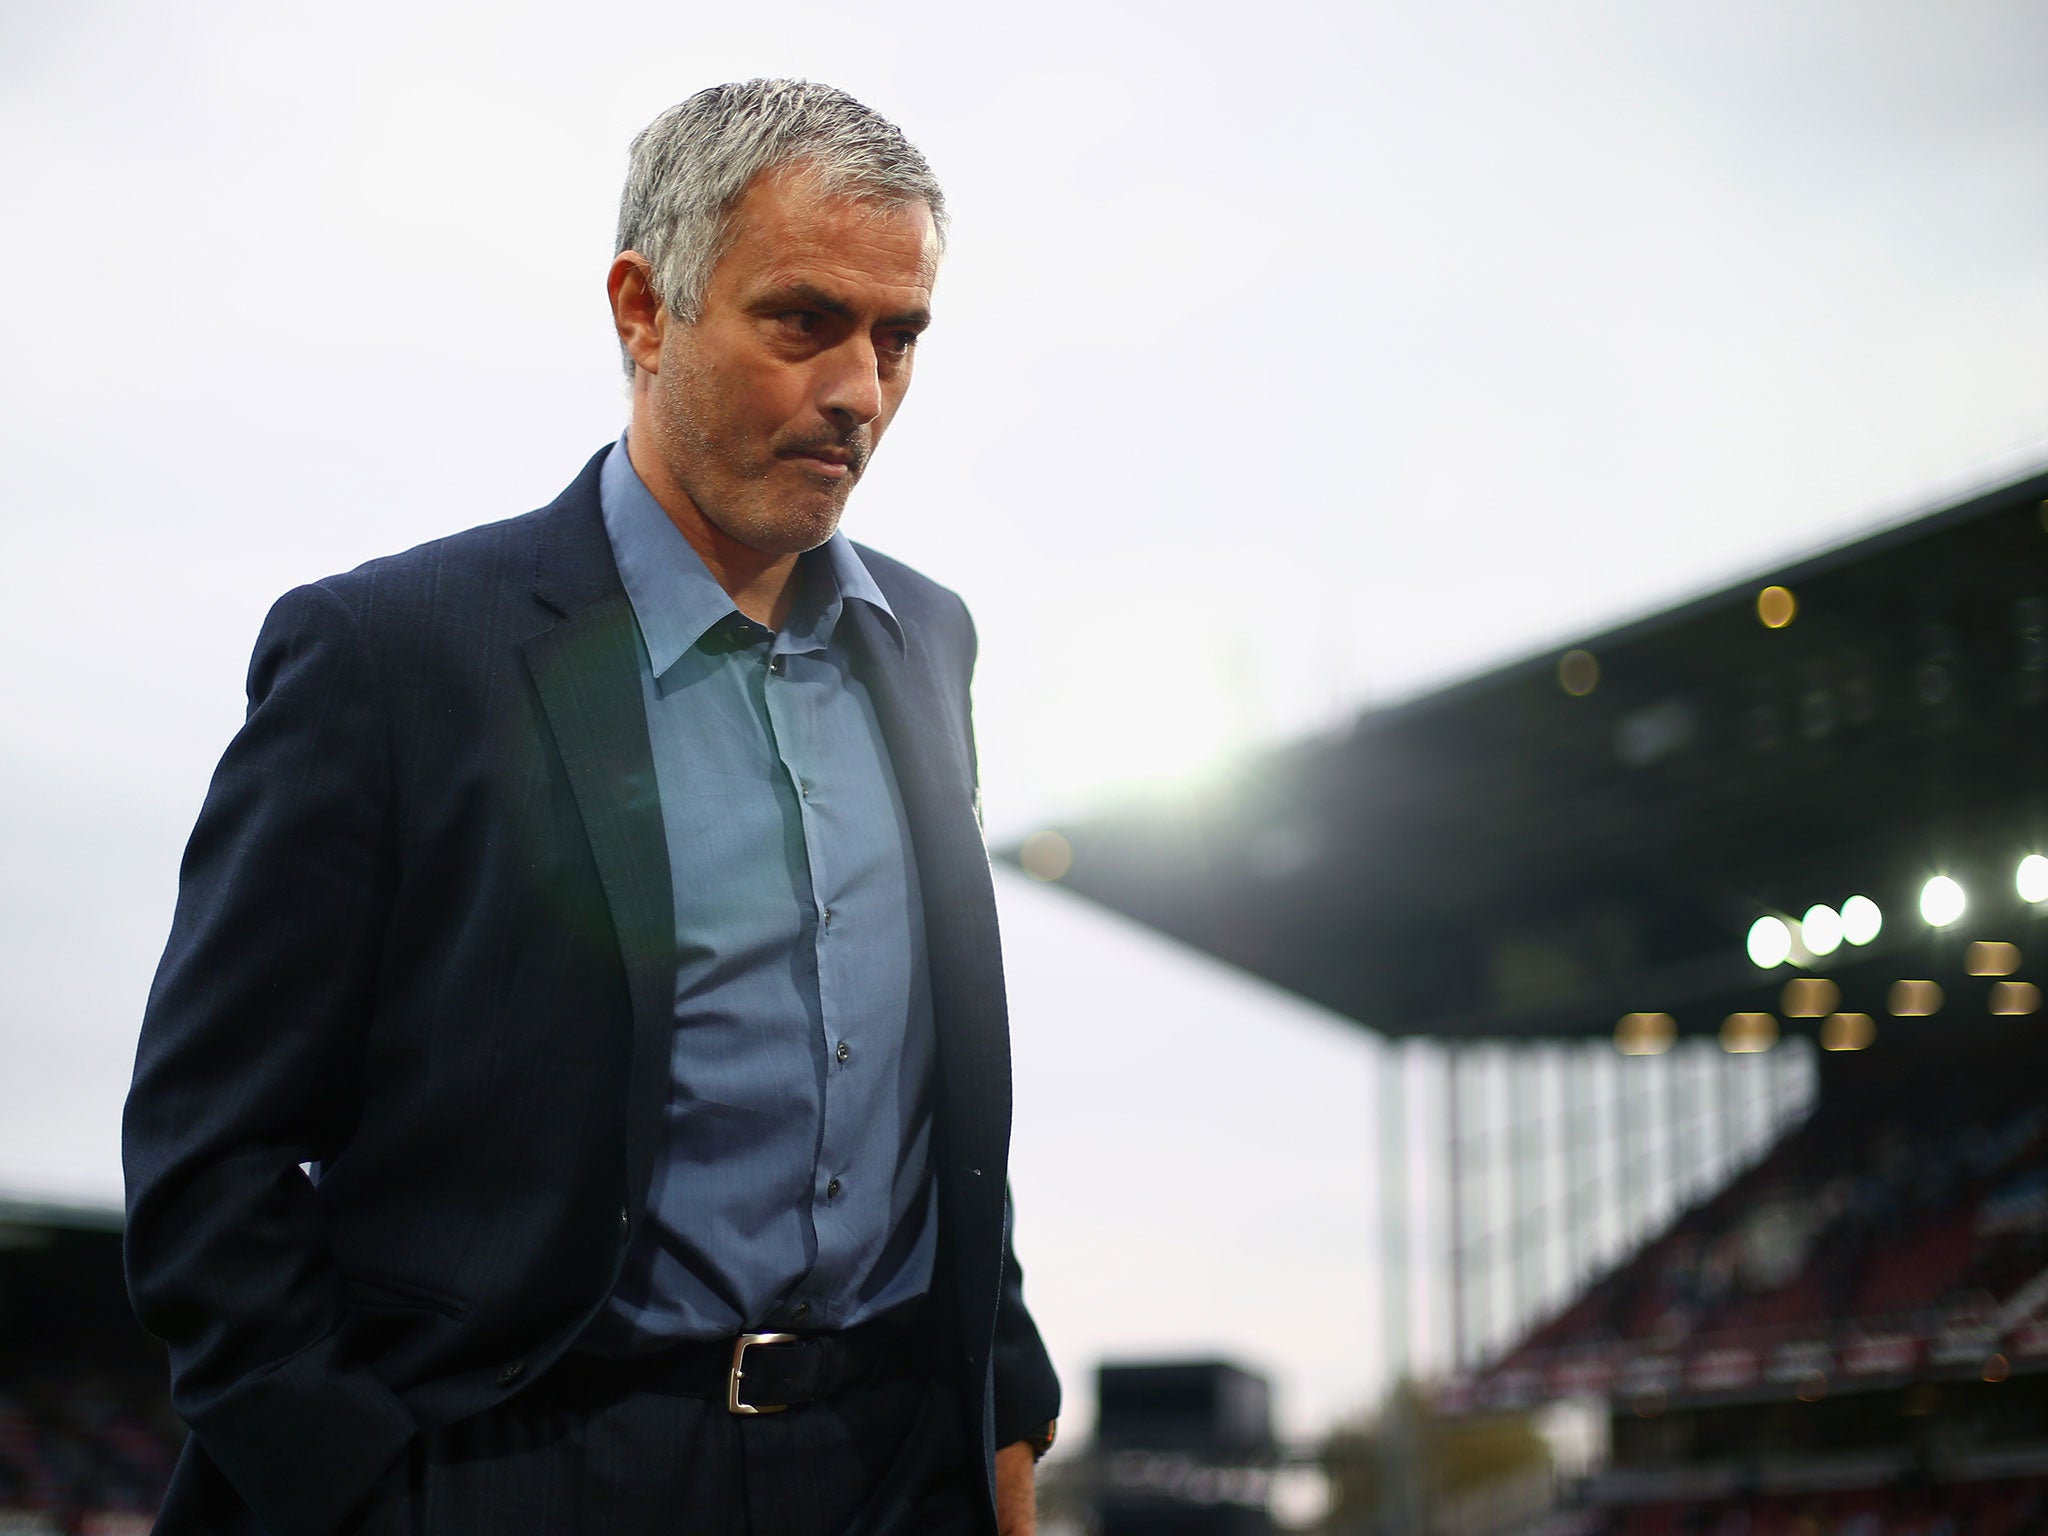 &#13;
Chelsea manager Jose Mourinho during the defeat by West Ham&#13;